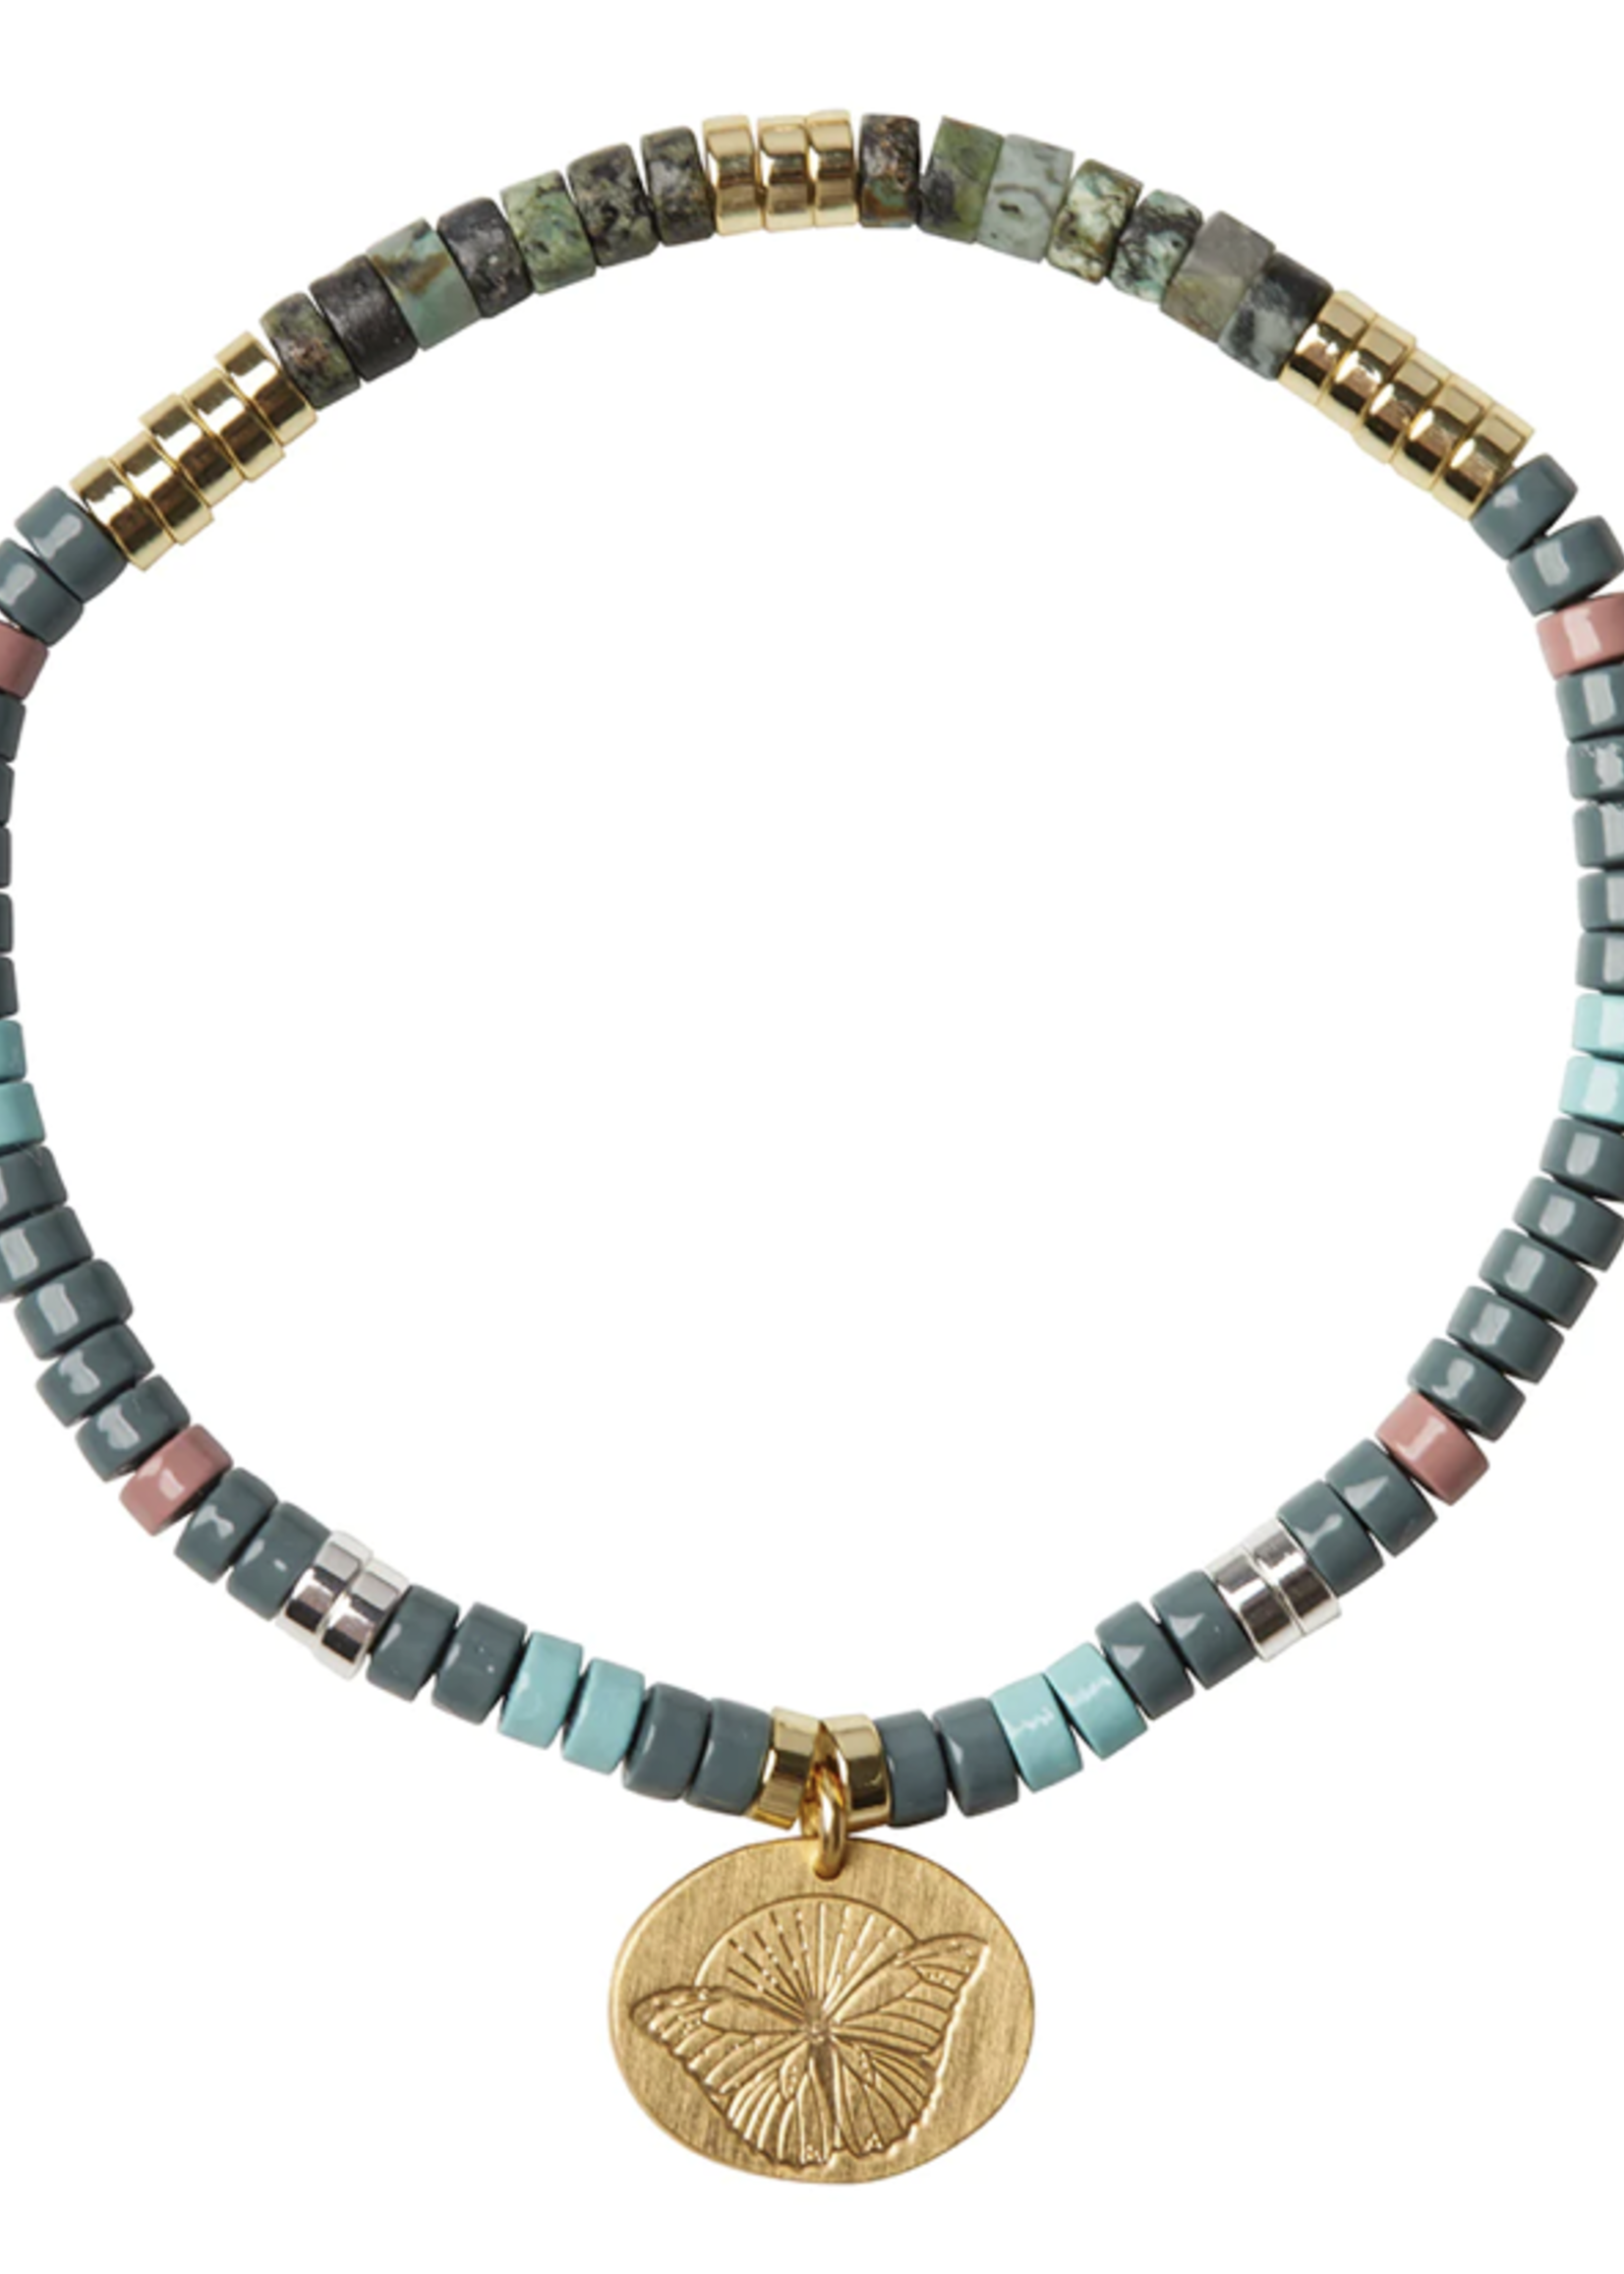 Stone Intention Charm Bracelet - African Turquoise/Silver/Gold